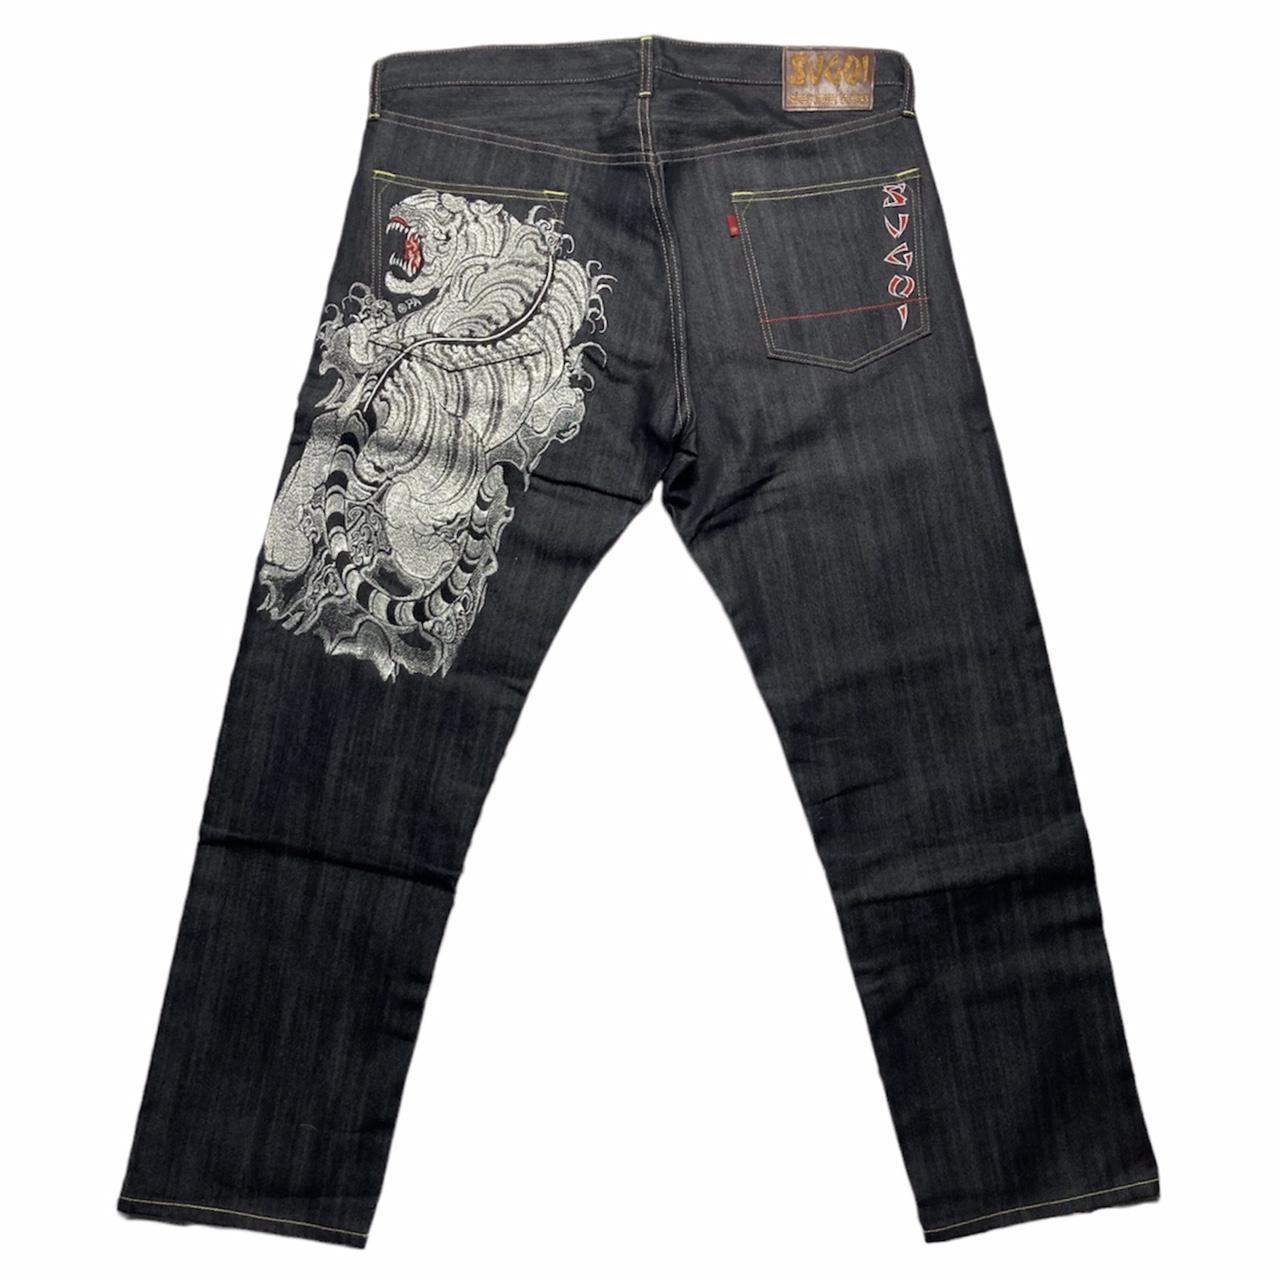 Sugoi Jeans Japanese denim jeans with silver tiger... - Depop